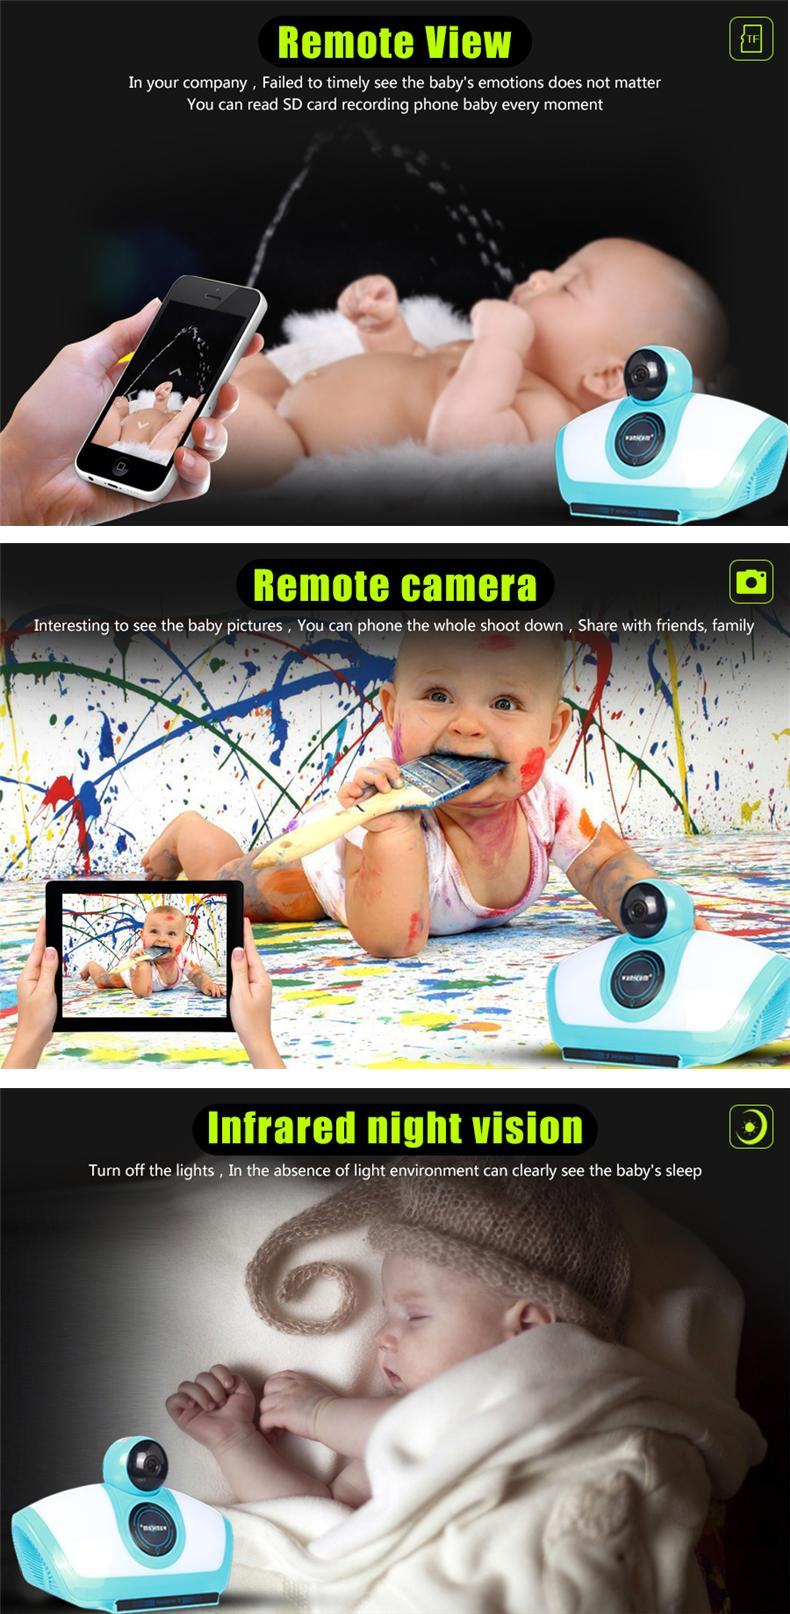 WANSCAM-HW0033-720P-Smart-WiFi-Baby-Monitor-IP-P2P-Camera-IR-2-Way-Audio-Support-Remote-APP-Control-1075610